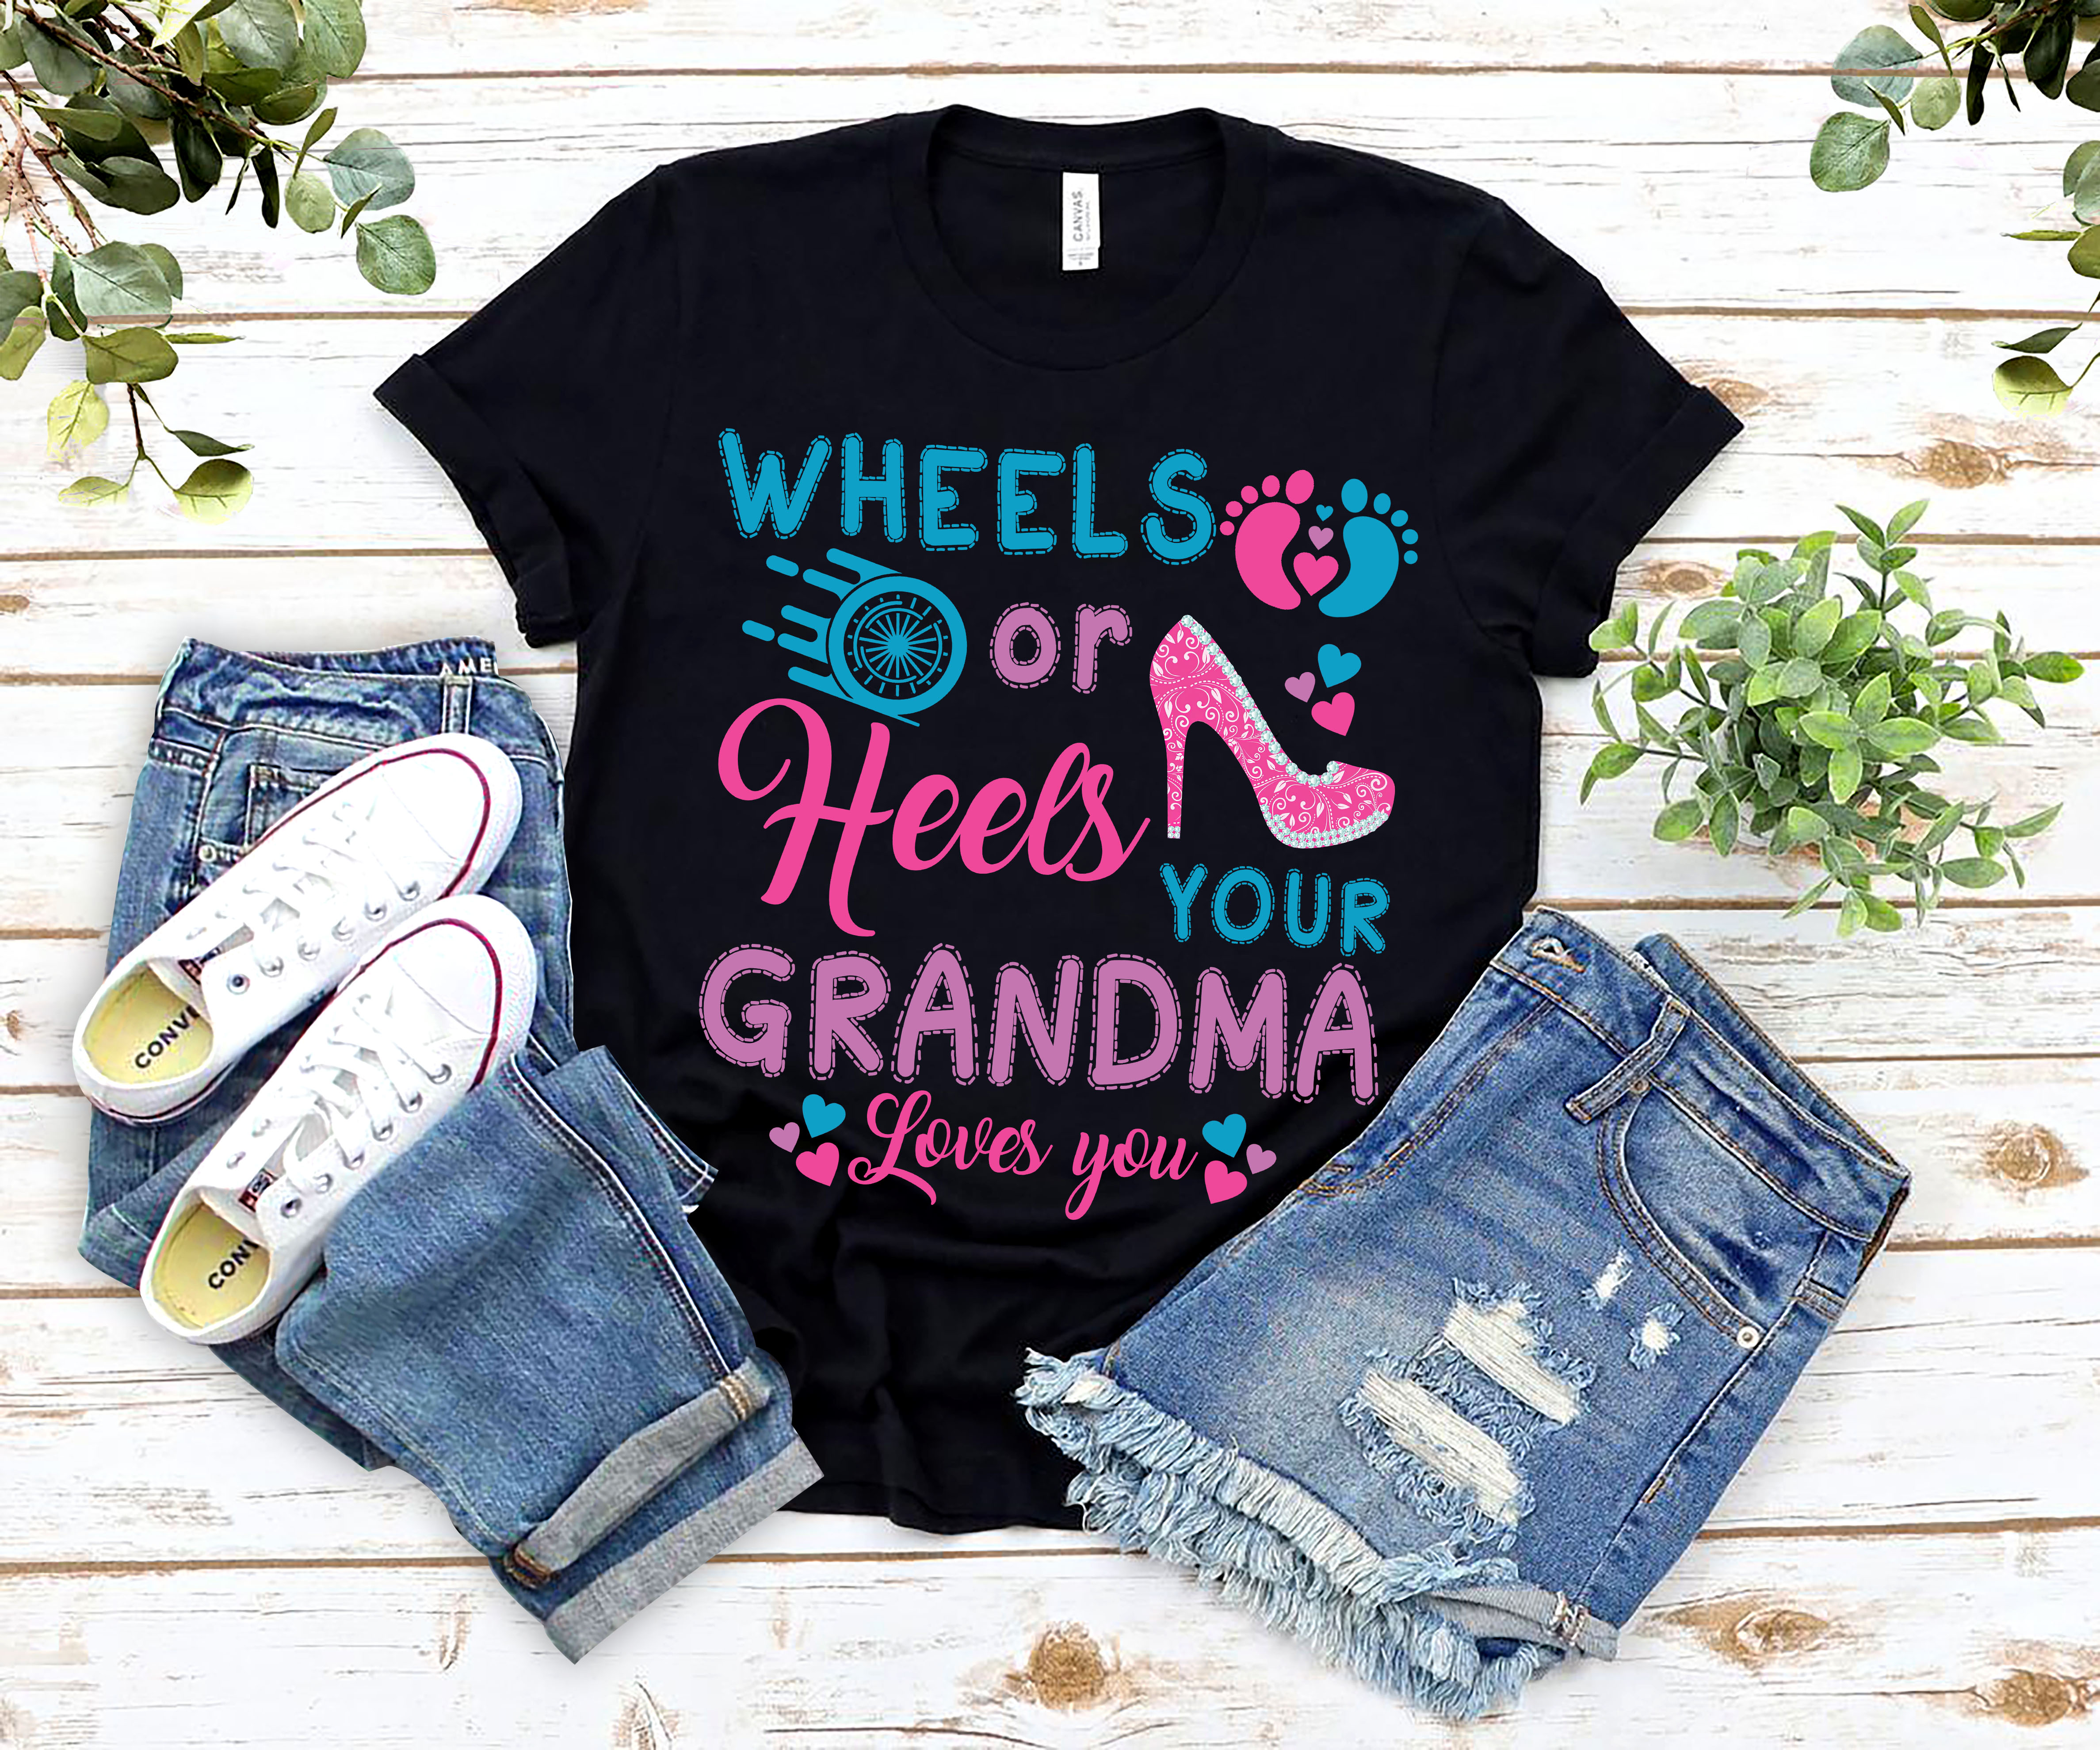 Wheels or heels we love you gender reveal party tee t shirt-CL – Colamaga